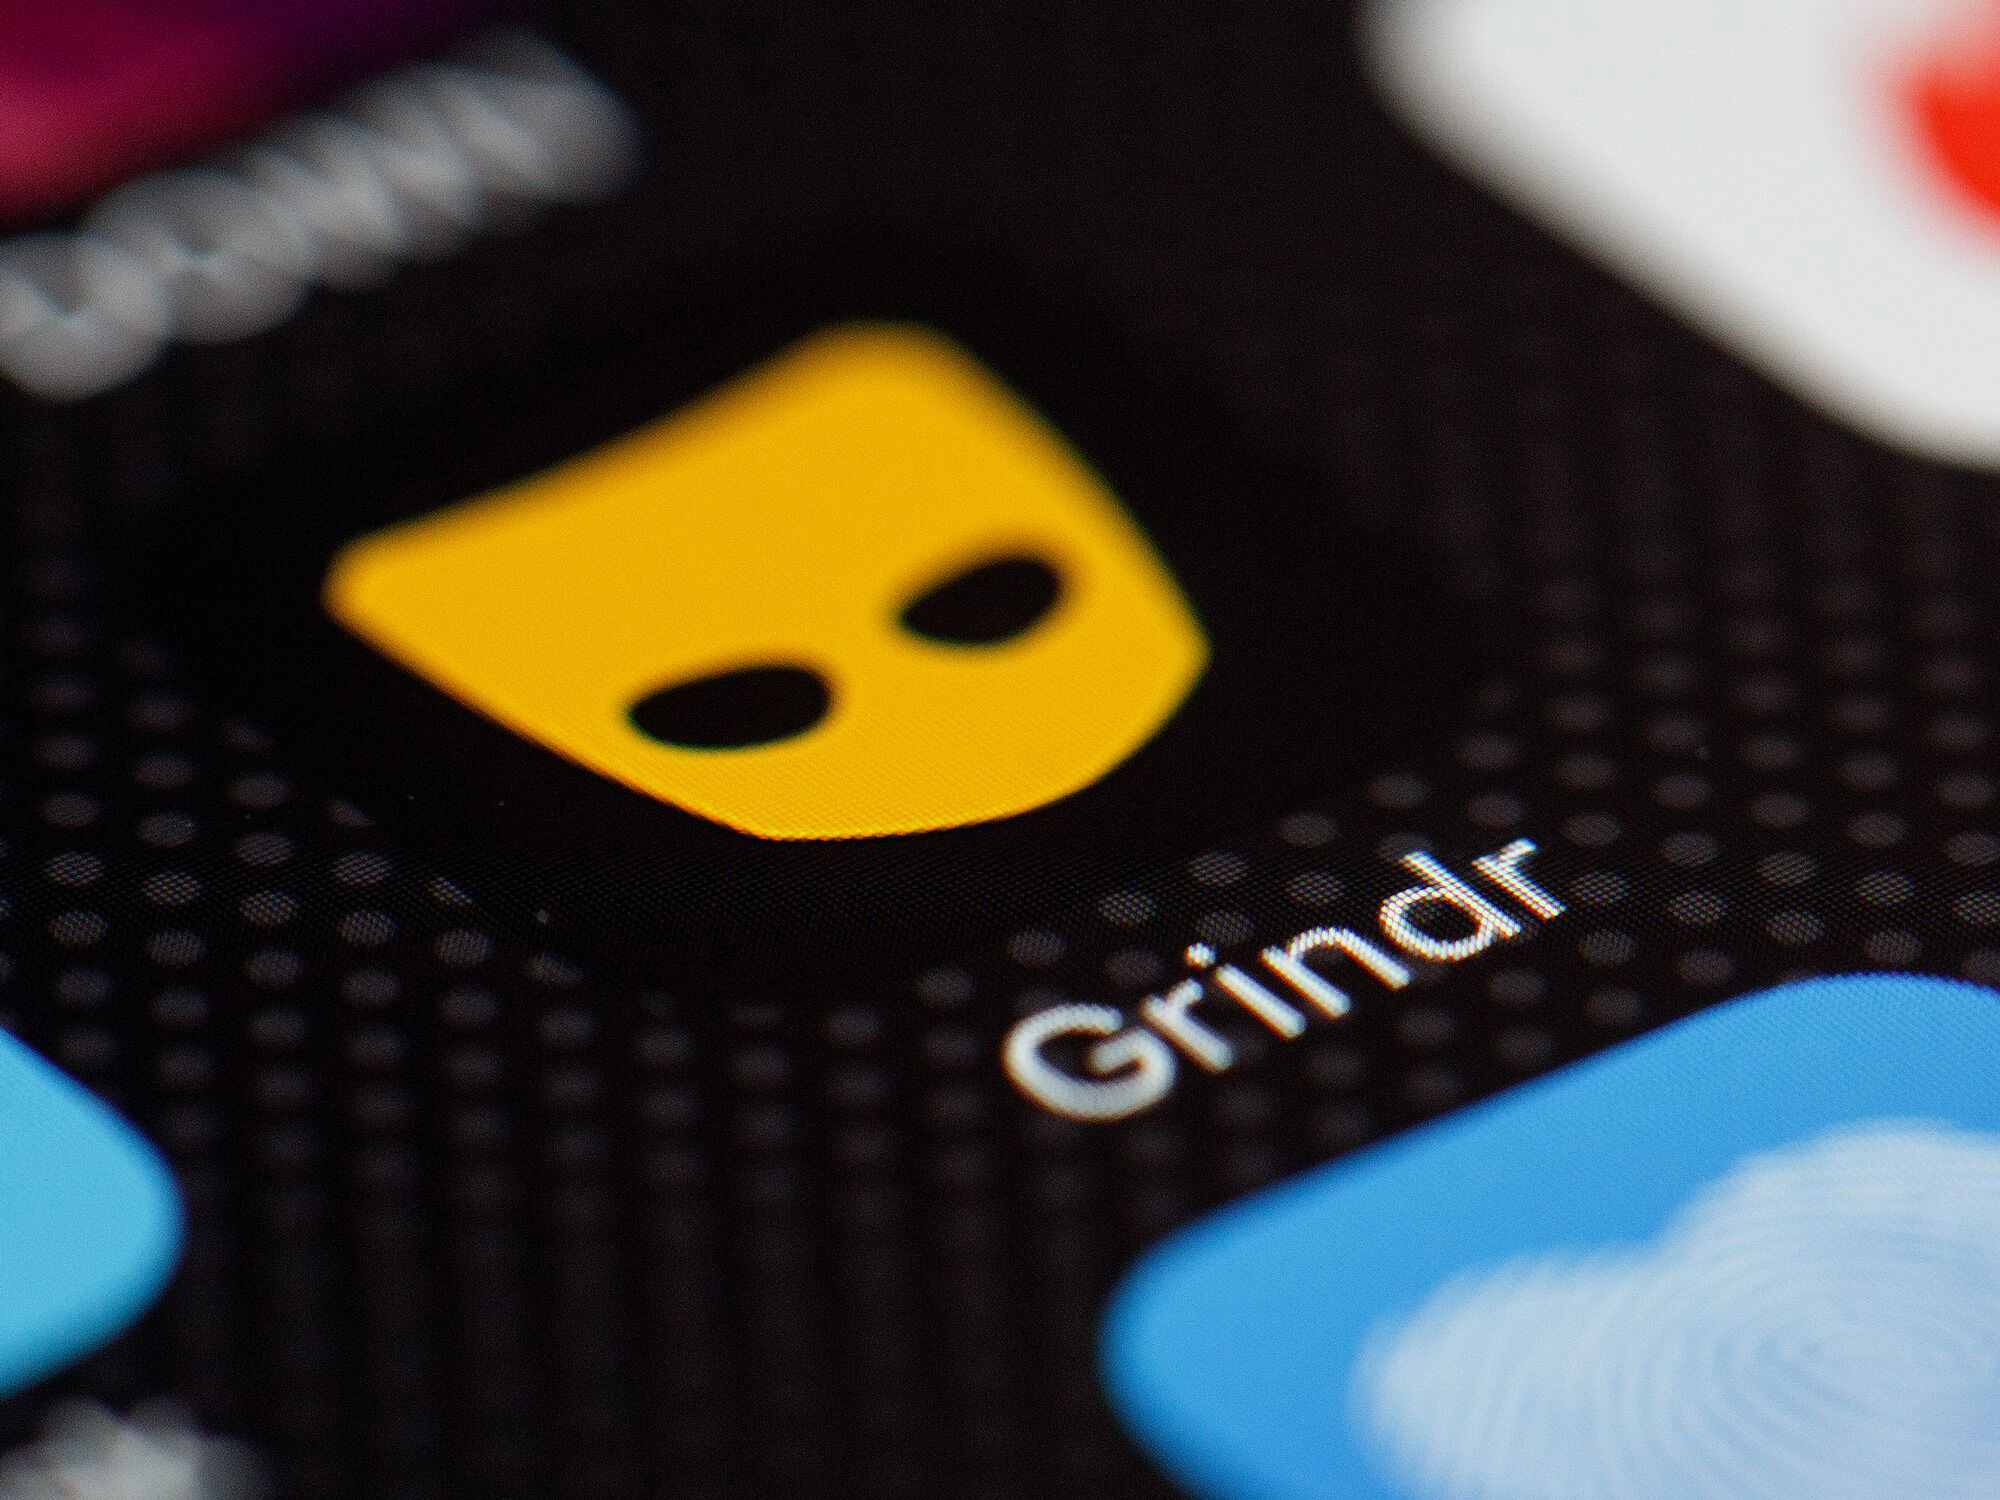 (Bloomberg) -- Grindr Inc. was sued by users for sharing sensitive personal information, including their HIV status, with advertising companies in a L